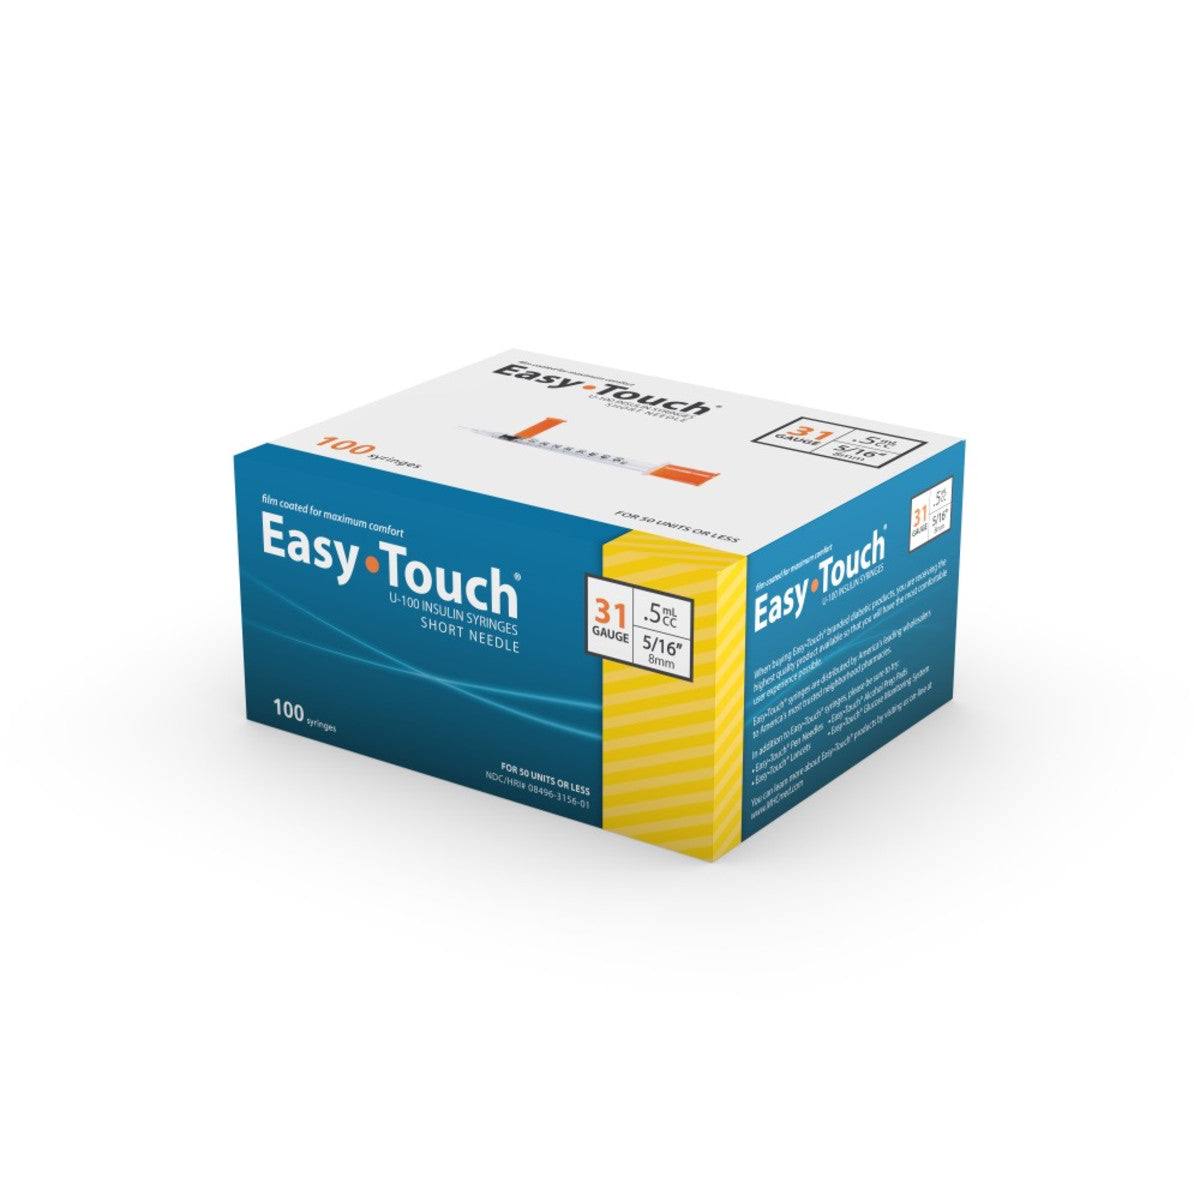 Easy Touch Insulin Syringe 31g 5cc - Yellow